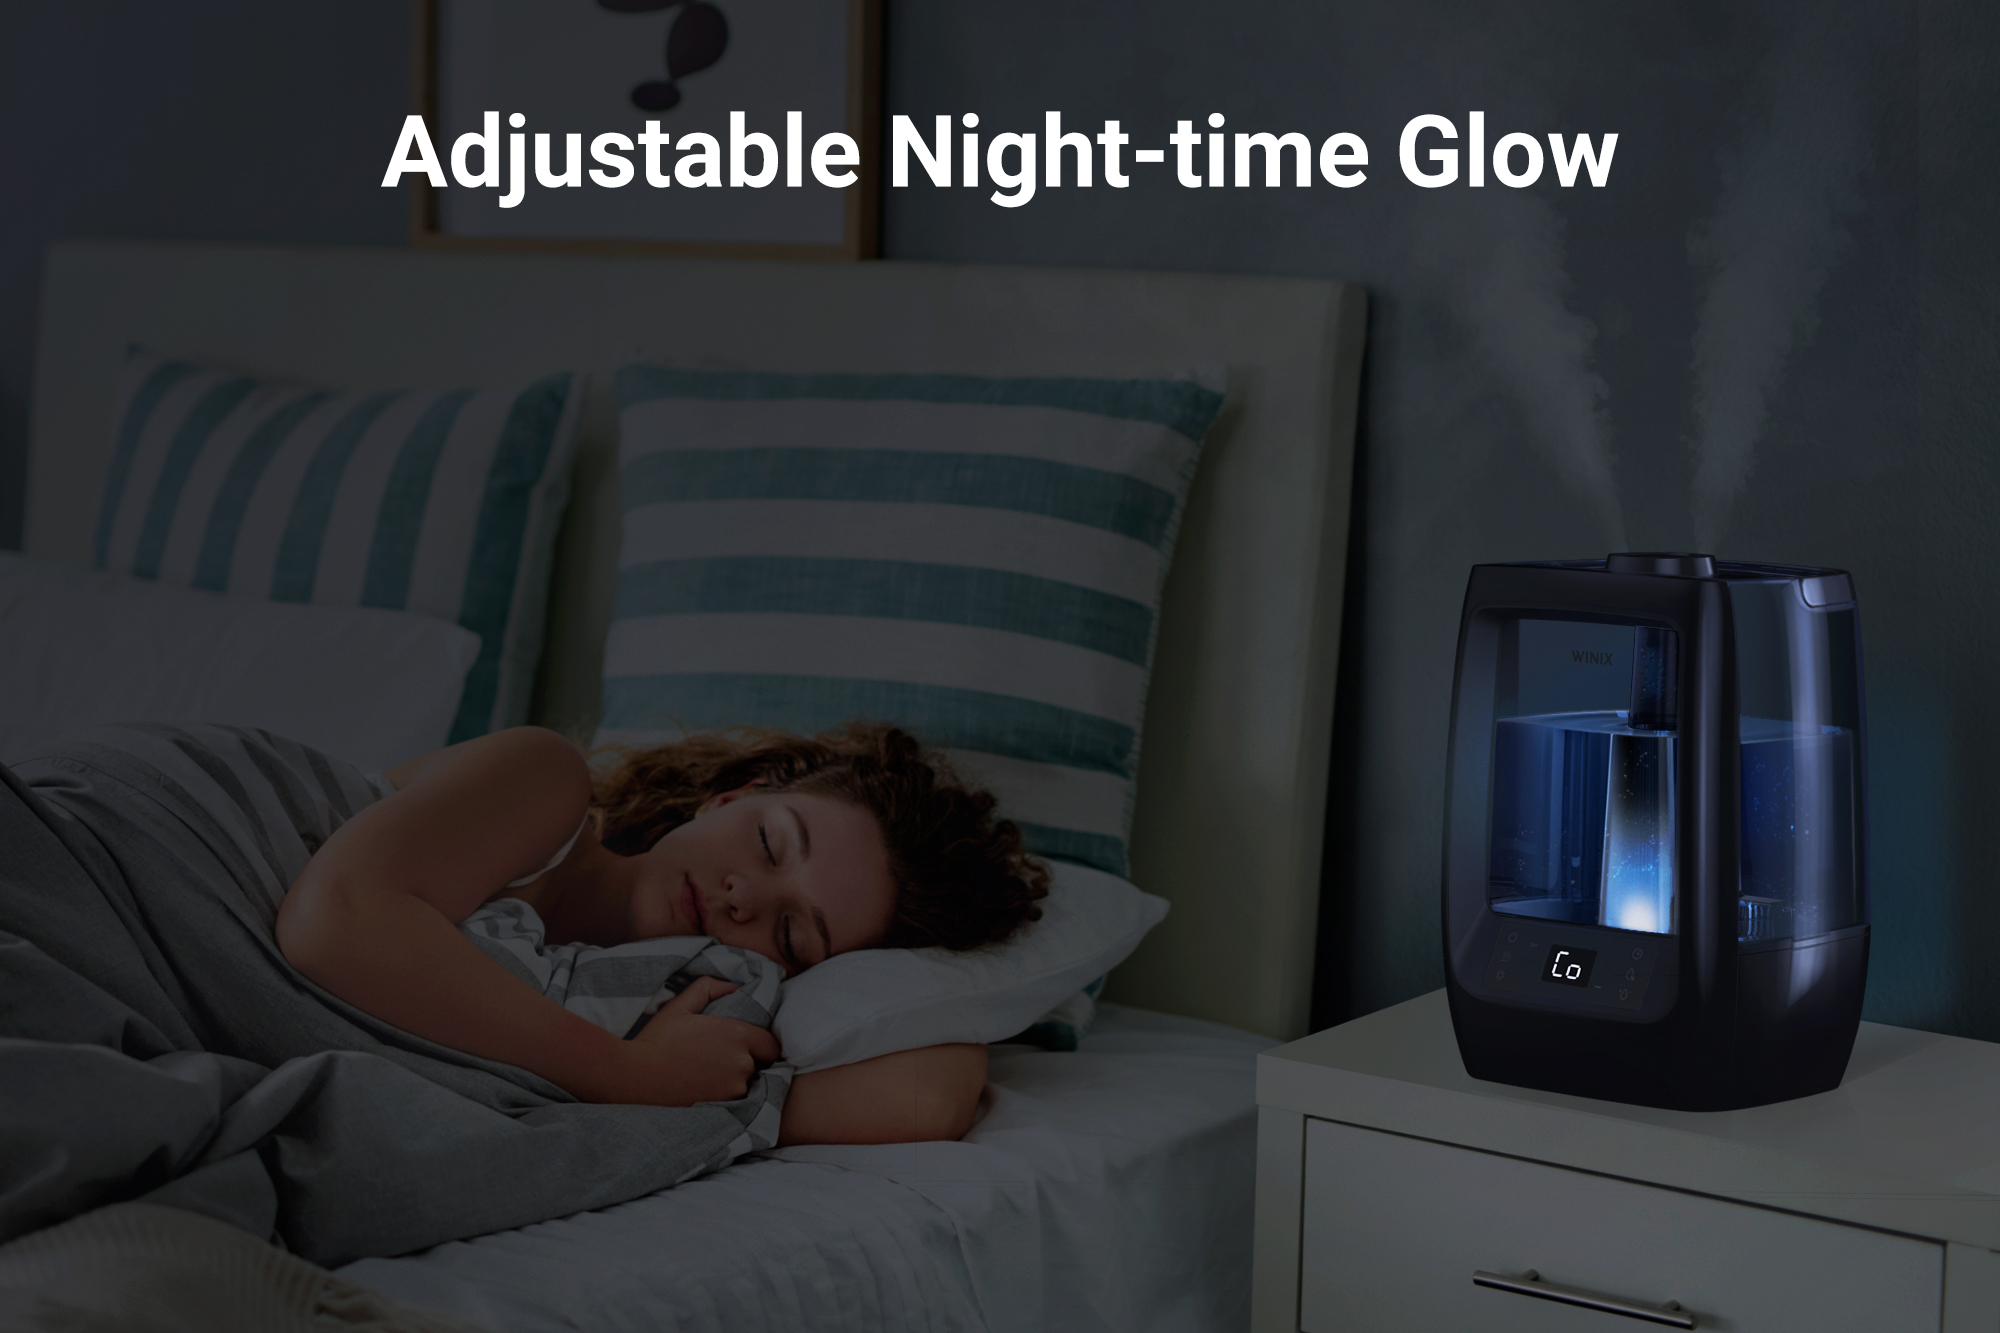 L200 humidifier on with woman asleep and text saying Adjustable Night-time Glow